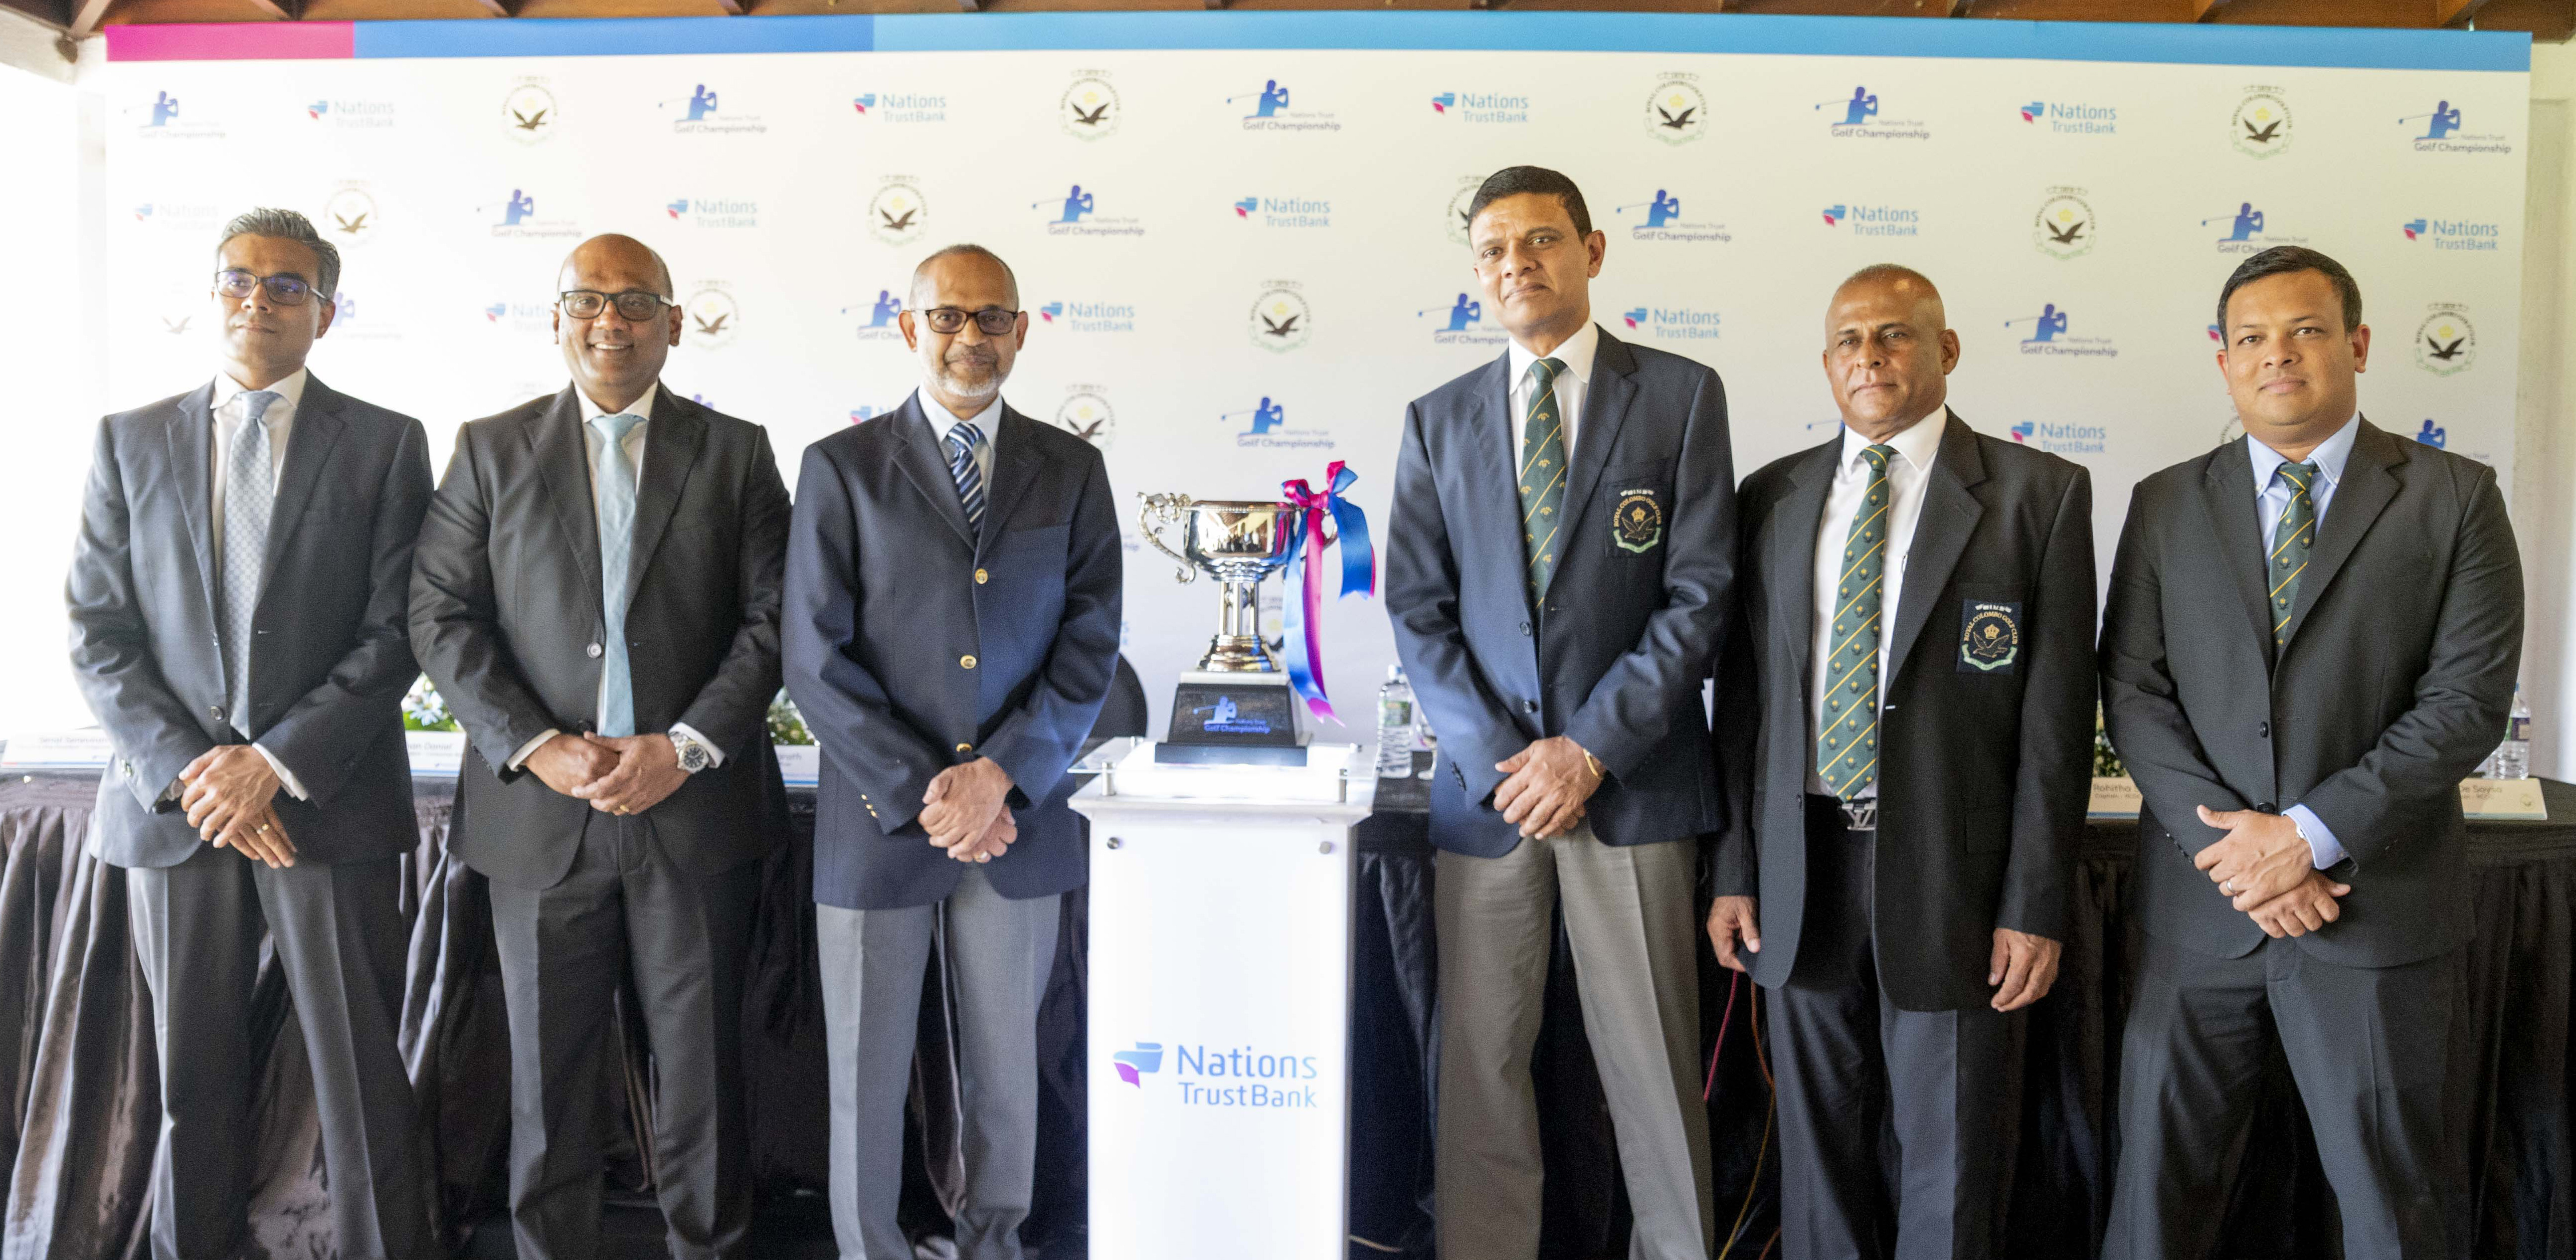 The prestigious Nations Trust Golf Championship swings into action